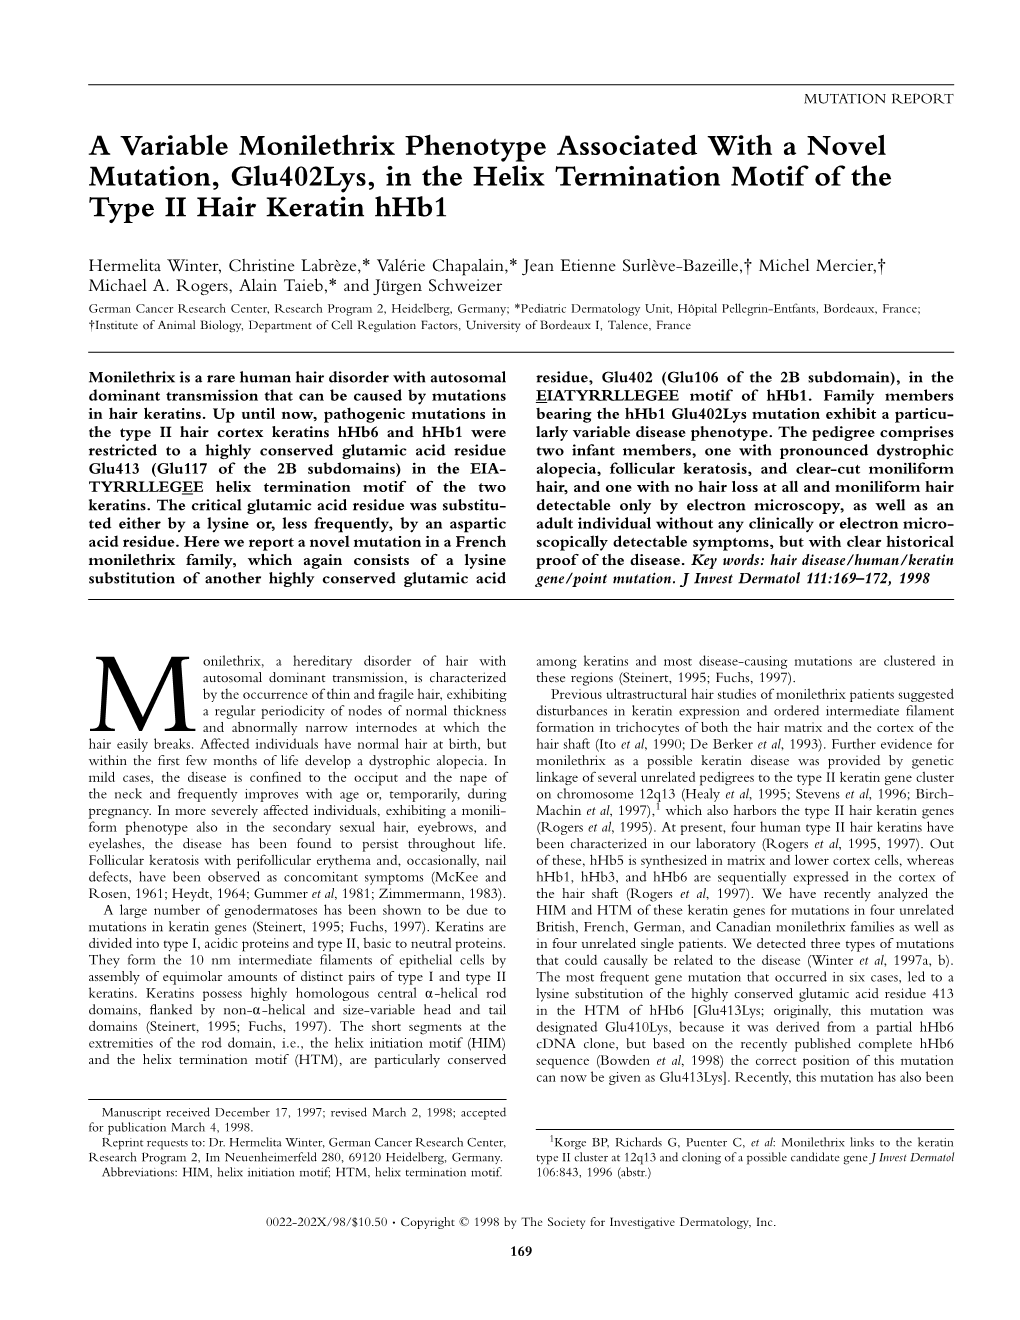 A Variable Monilethrix Phenotype Associated with a Novel Mutation, Glu402lys, in the Helix Termination Motif of the Type II Hair Keratin Hhb1